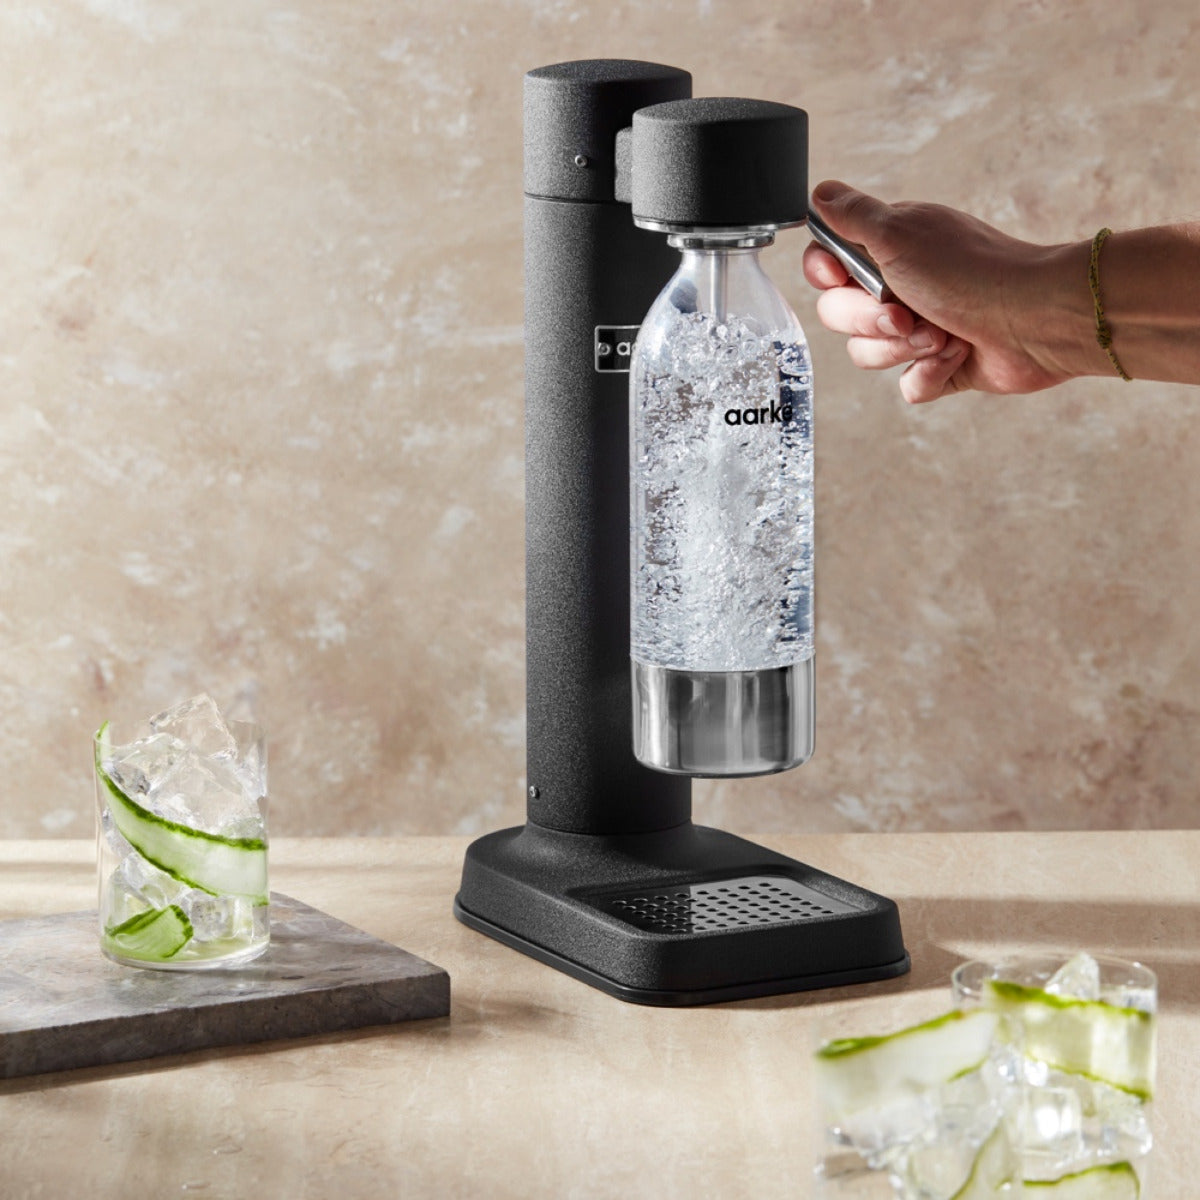 A person carbonating water with the Aarke Carbonator 3 in Matte Black.